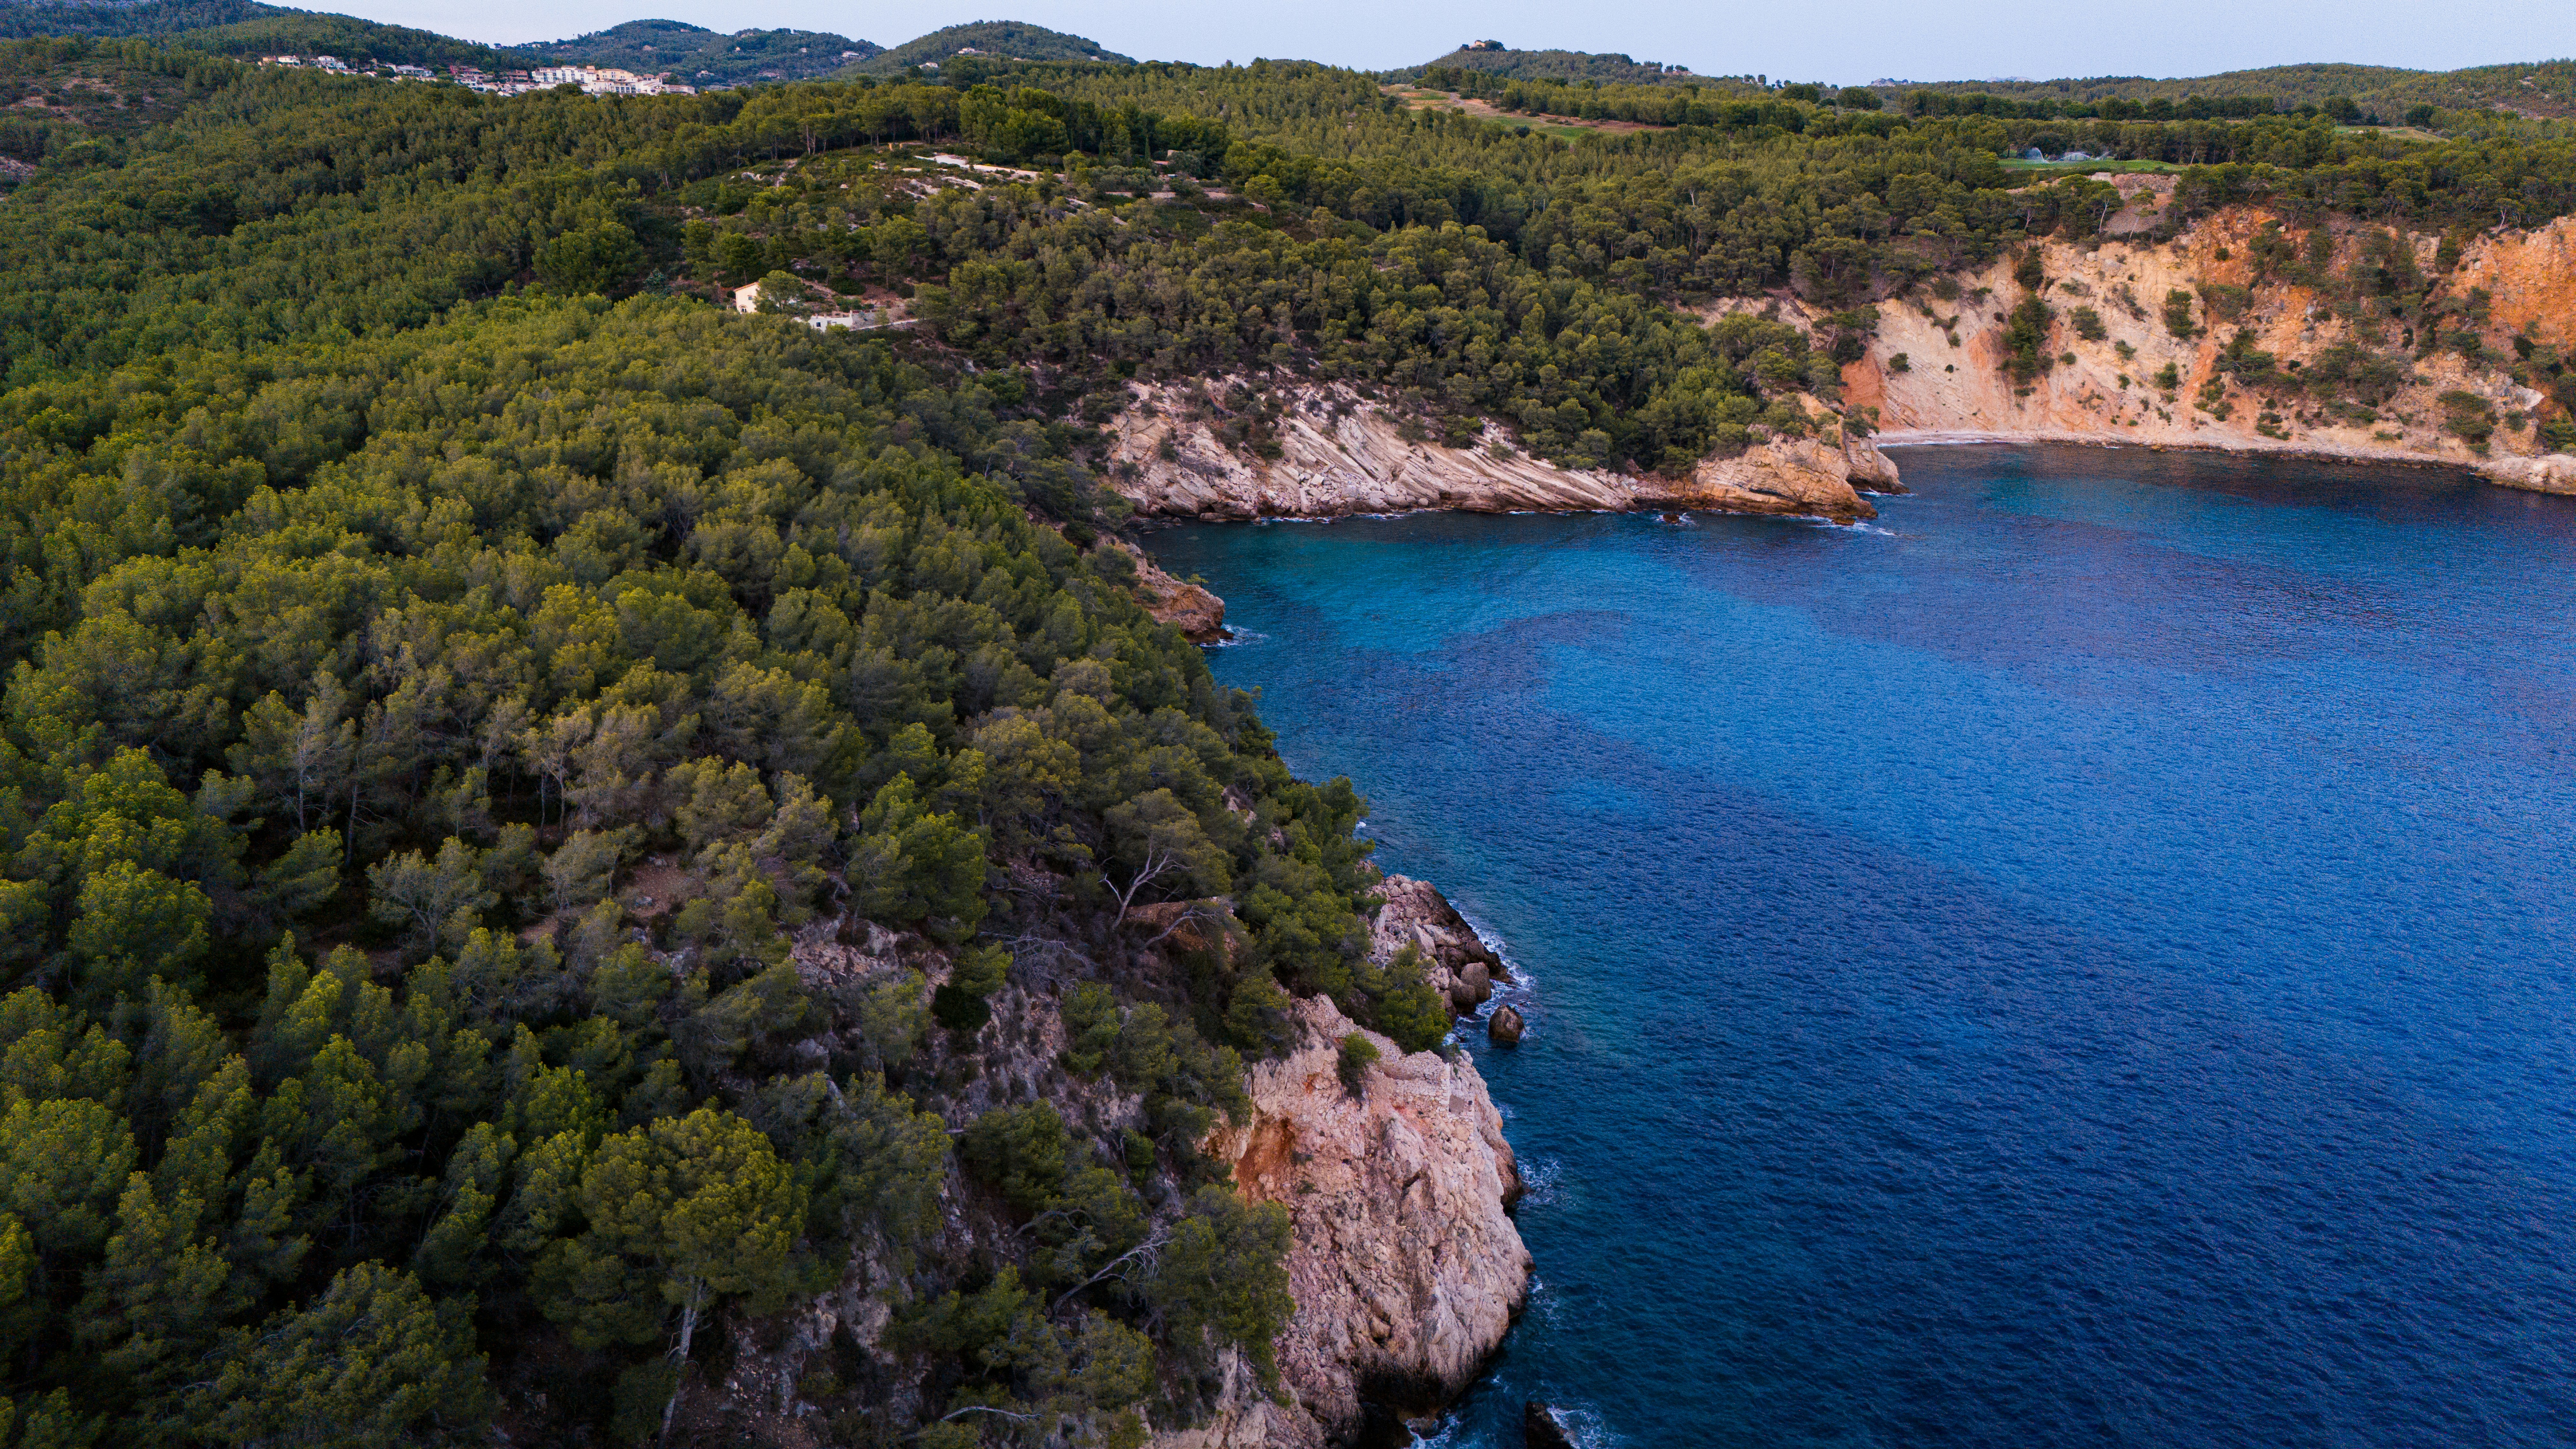 View of Calanques coast with blue sea from a drone